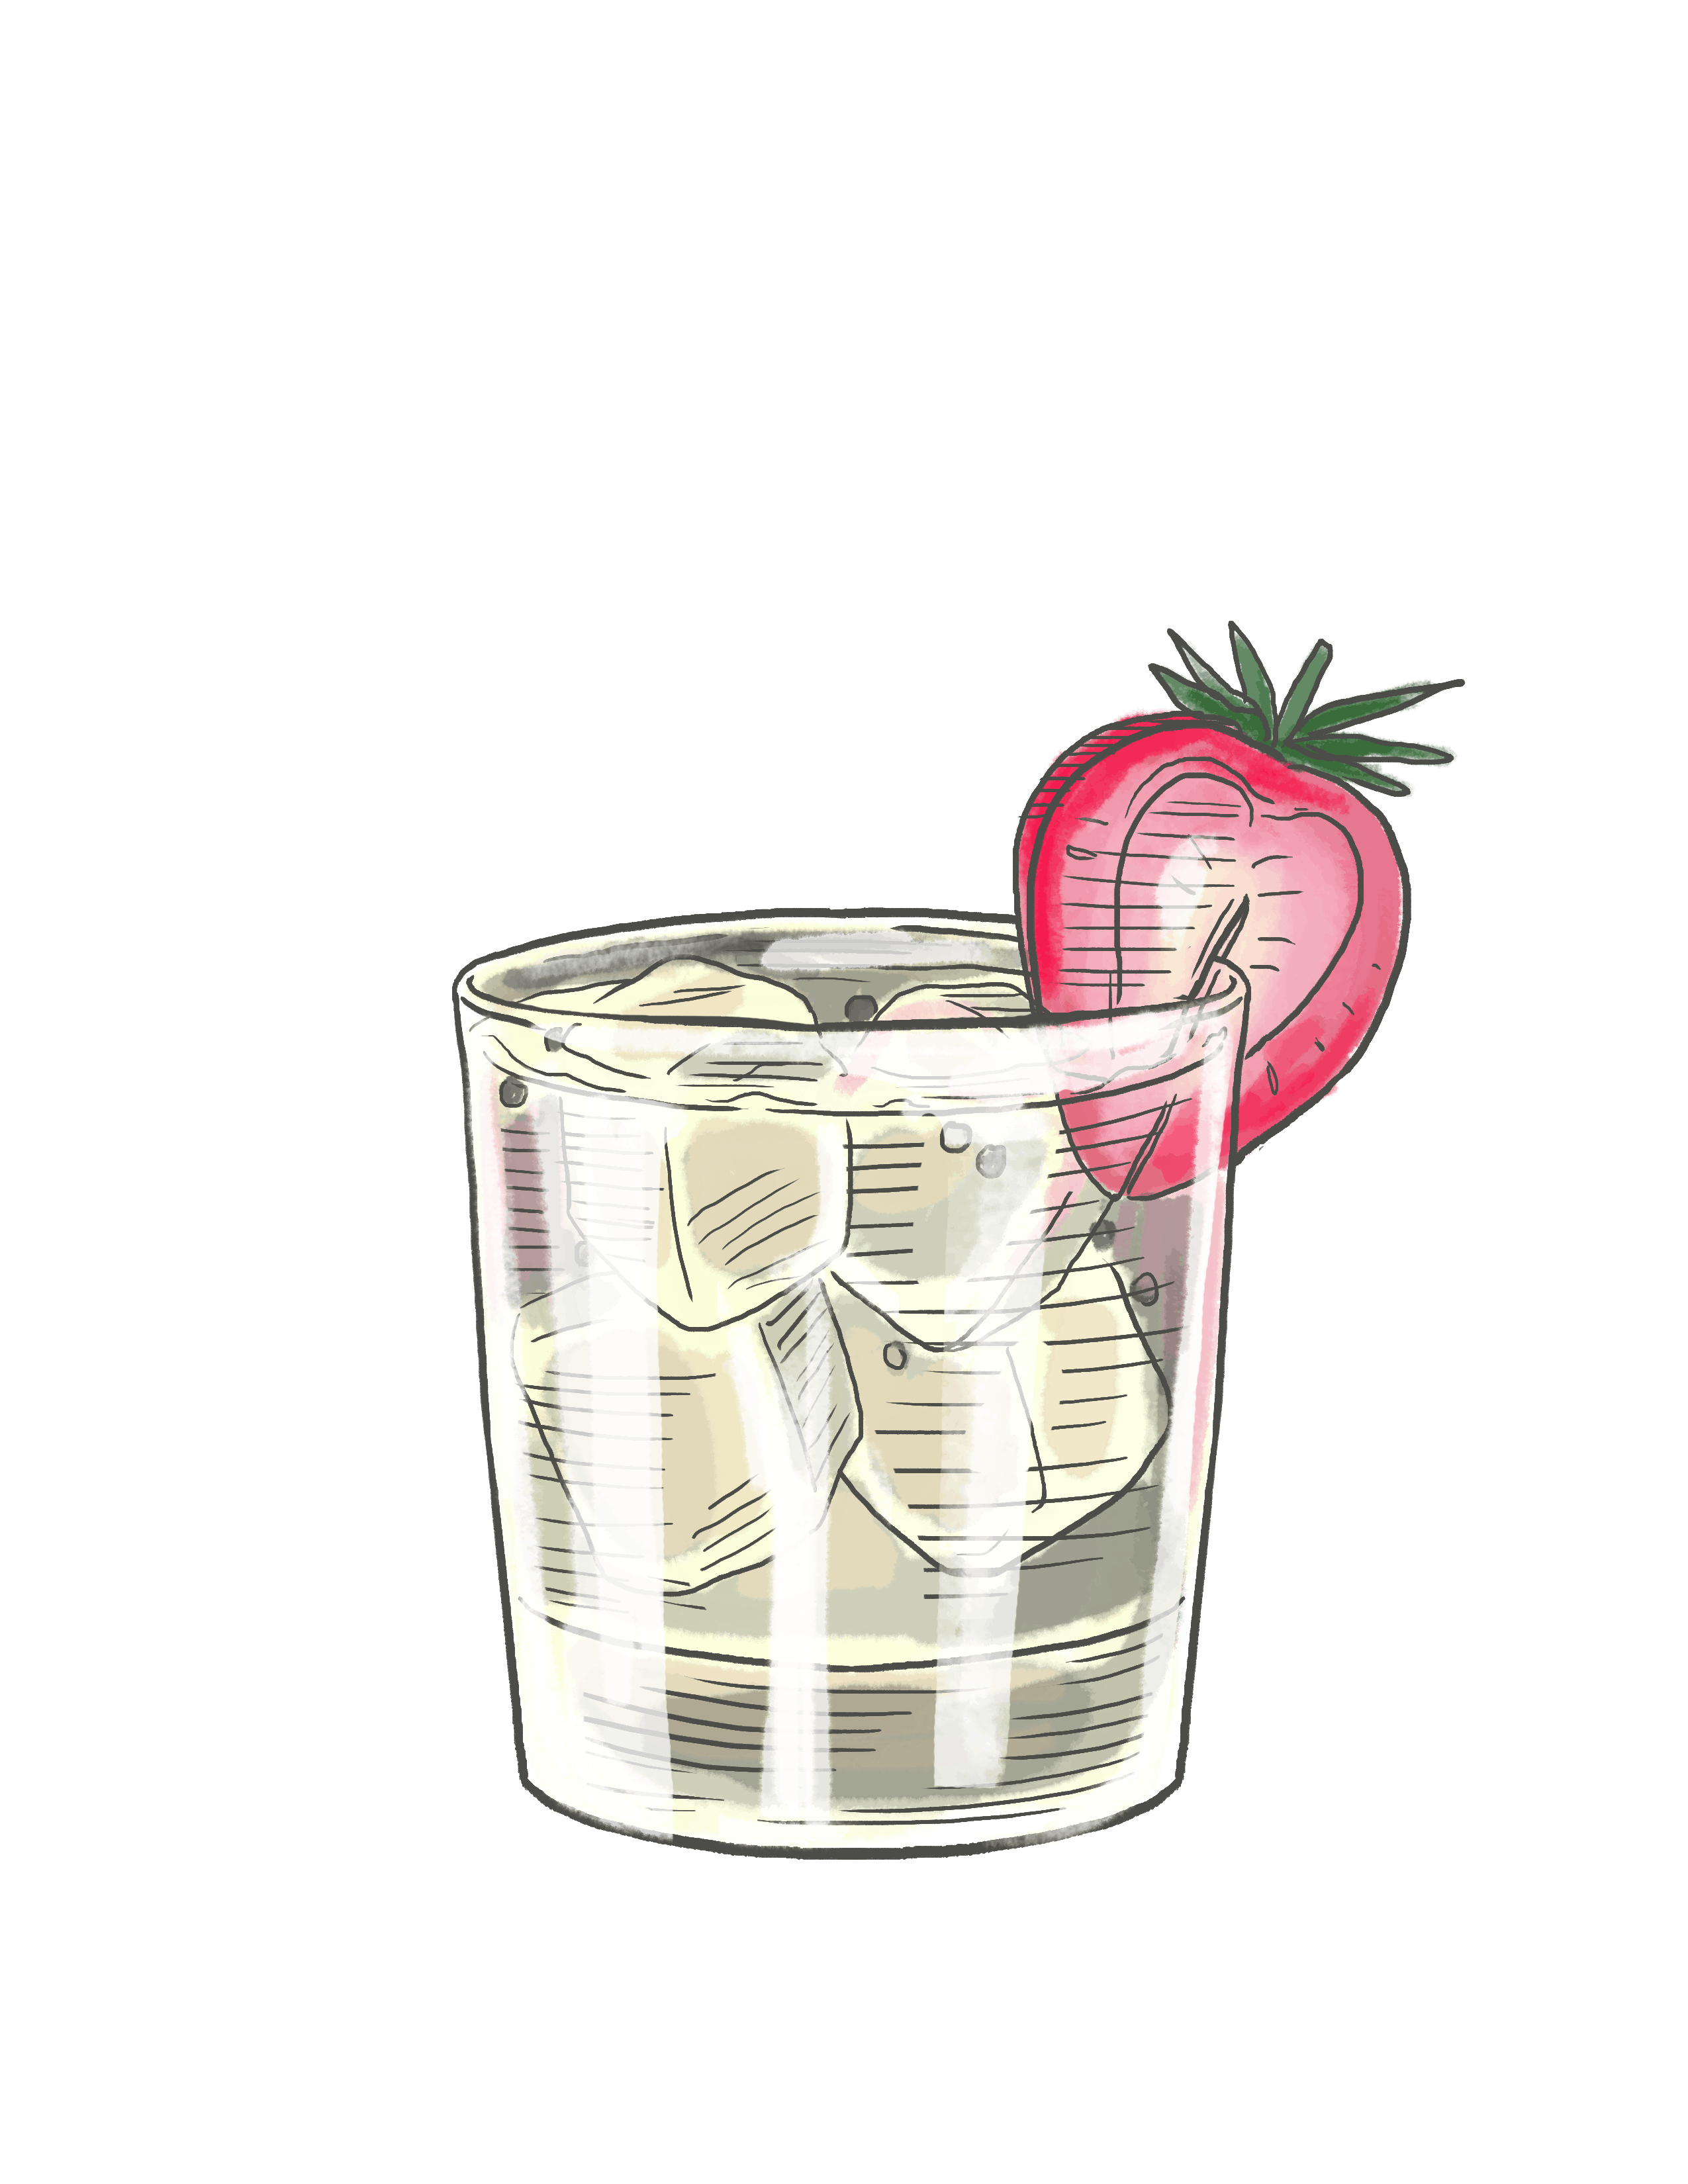 ARC - Cocktail Illustrations - Summer as a Verb.png